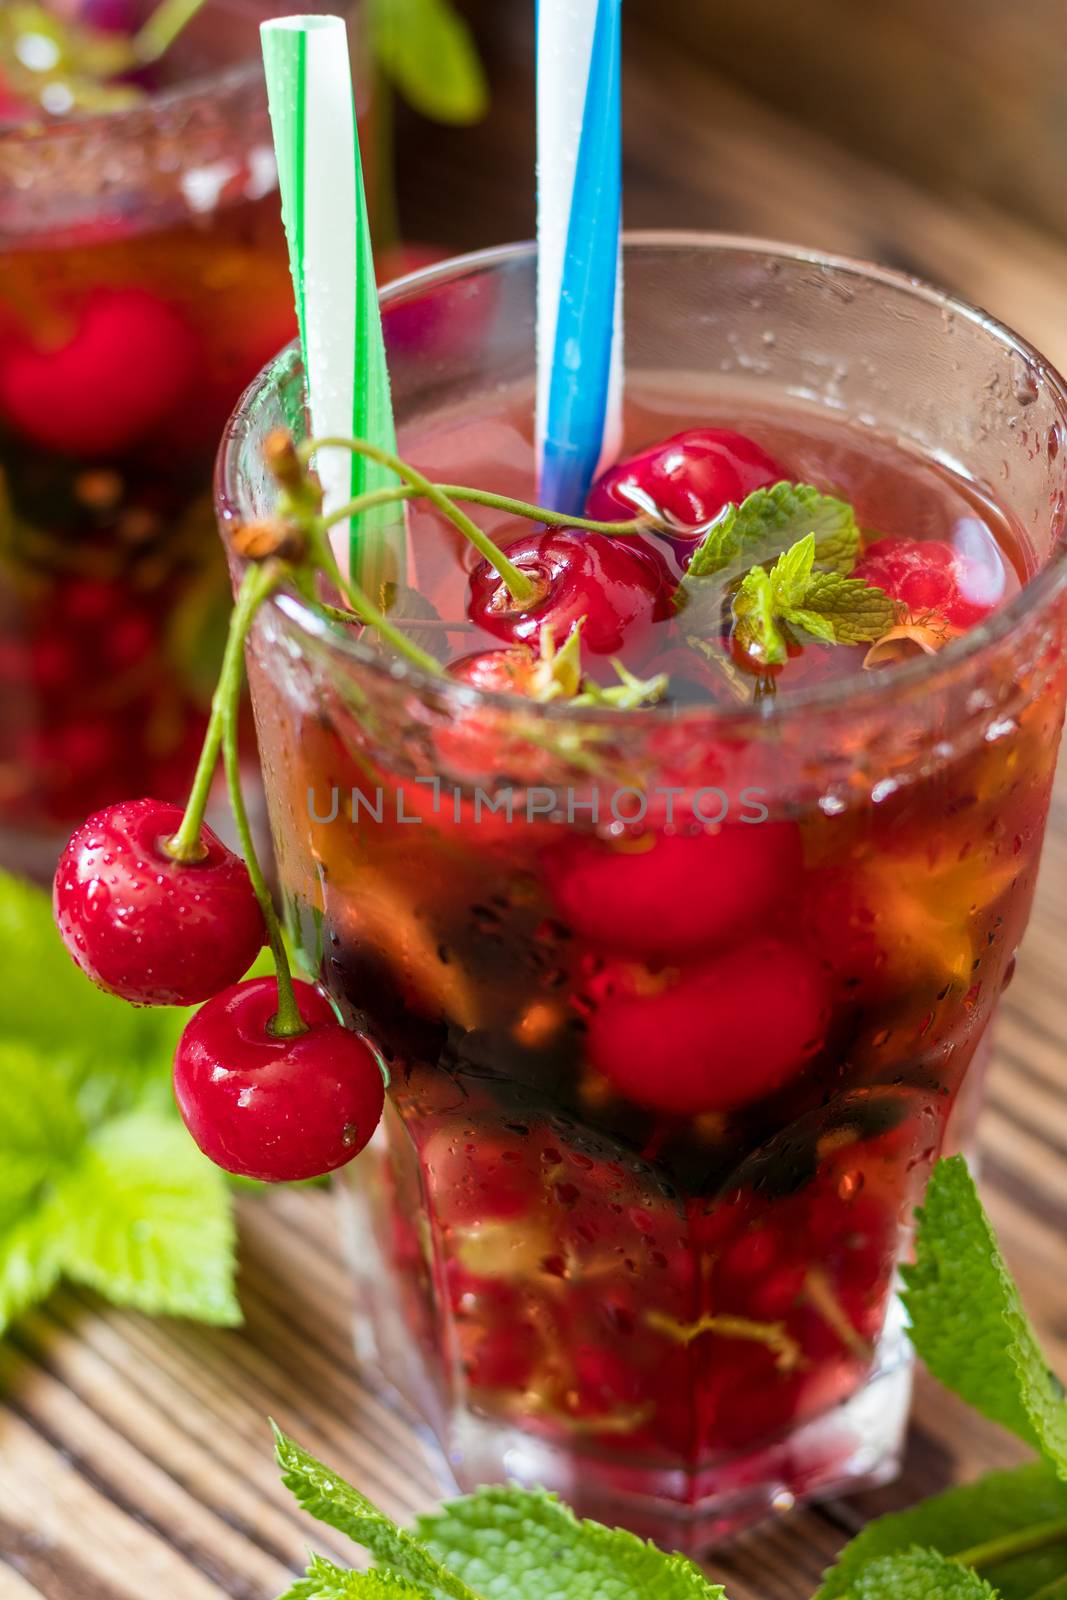 Glasses of refreshing  drink flavored with fresh fruit and decorated with cherries covered with dew drops. Wooden background